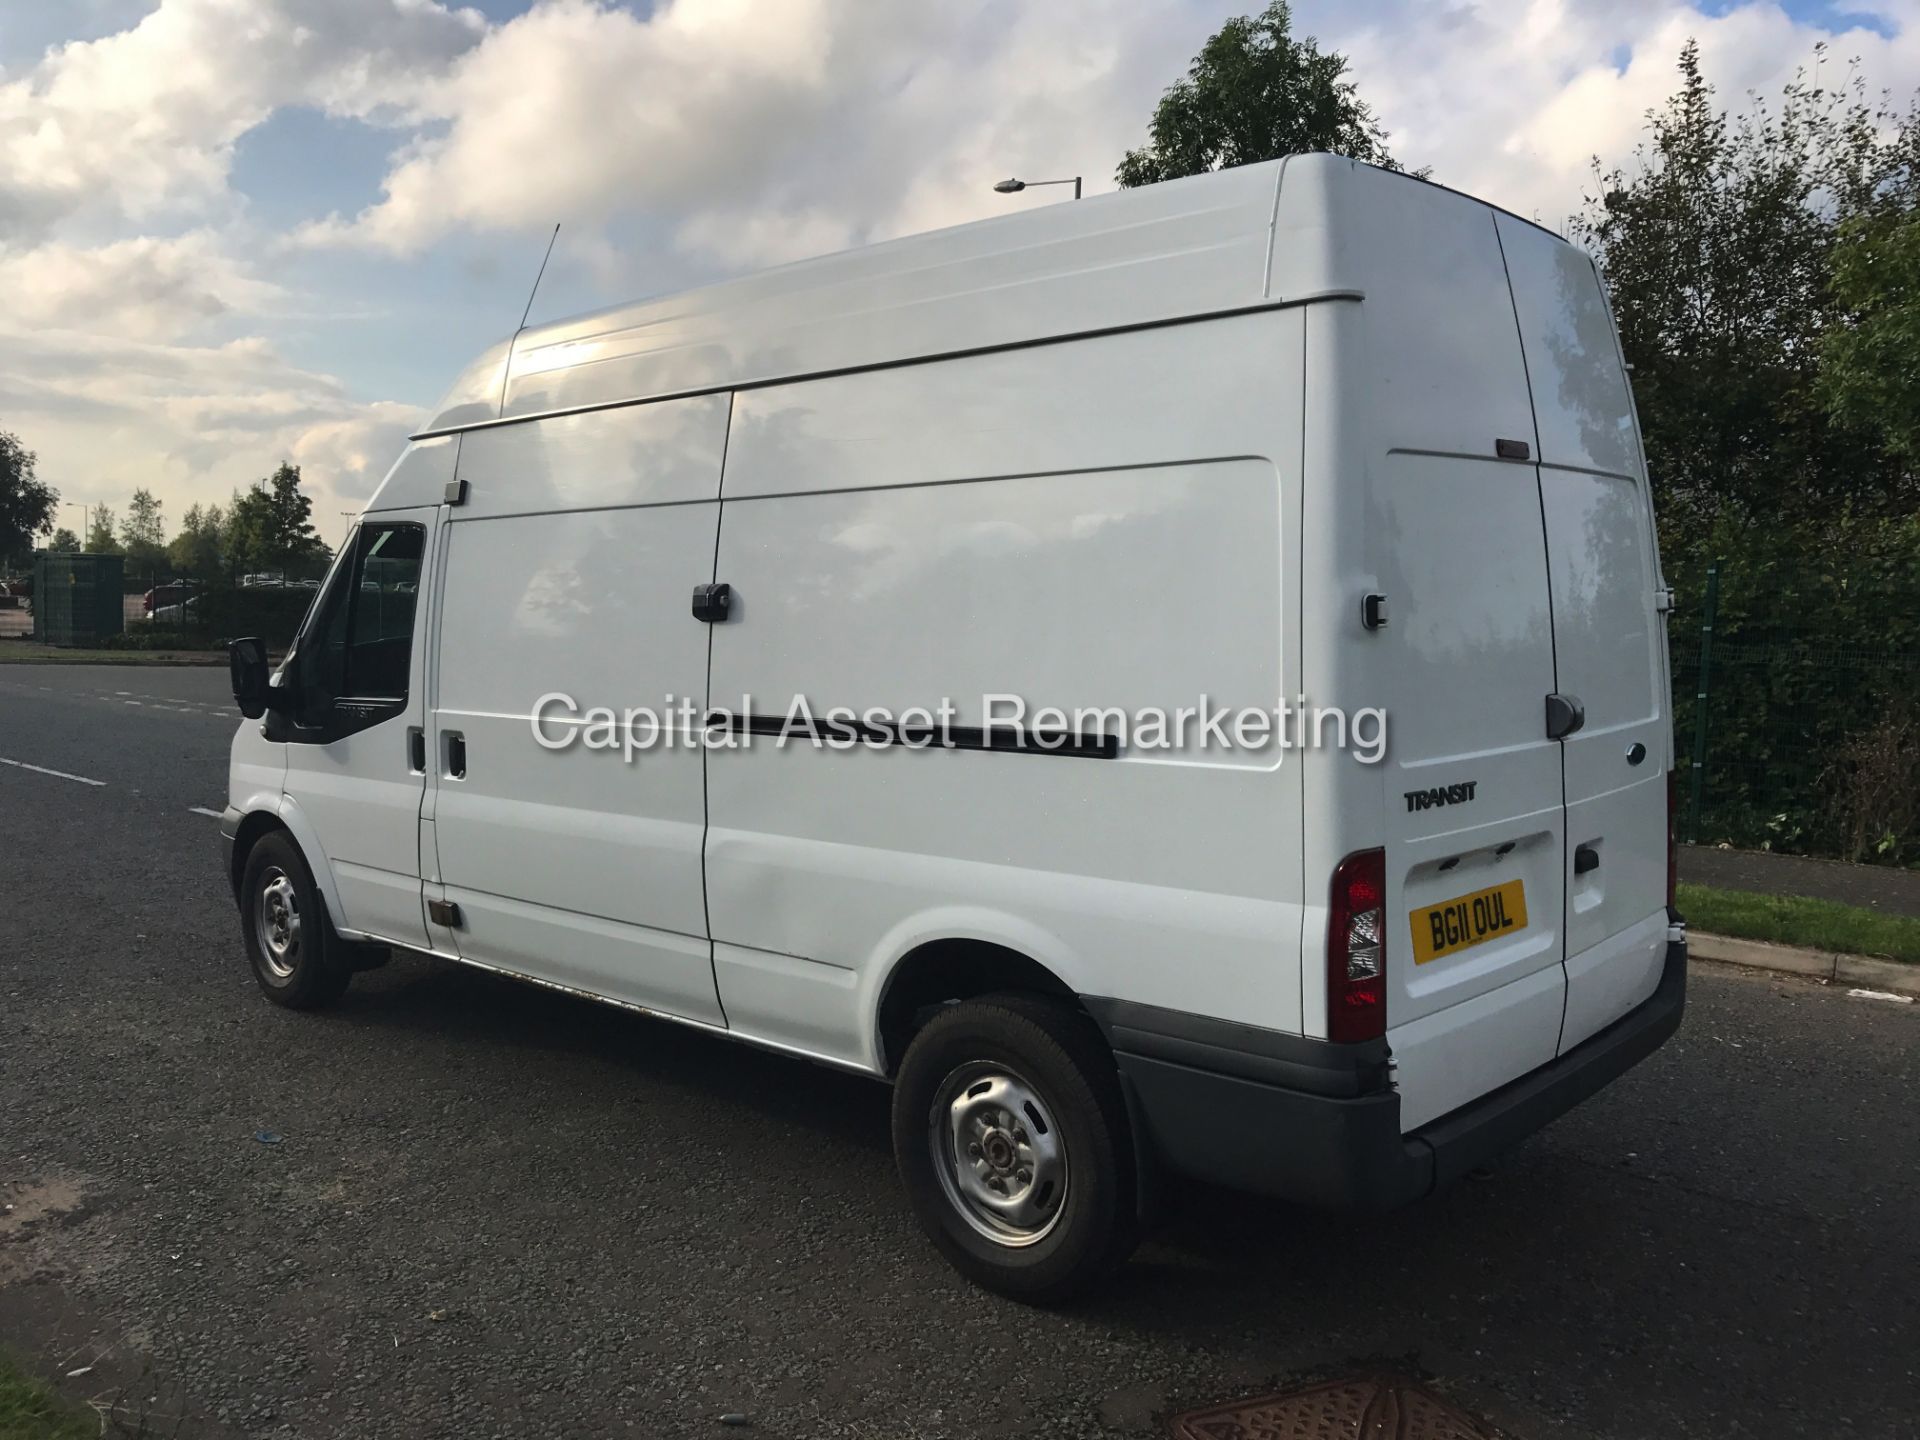 (ON SALE)FORD TRANSIT 2.4TDCI "115PSI / 6 SPEED" T350 - LWB / HIGH TOP (11 REG) LOW MILEAGE - - Image 8 of 18